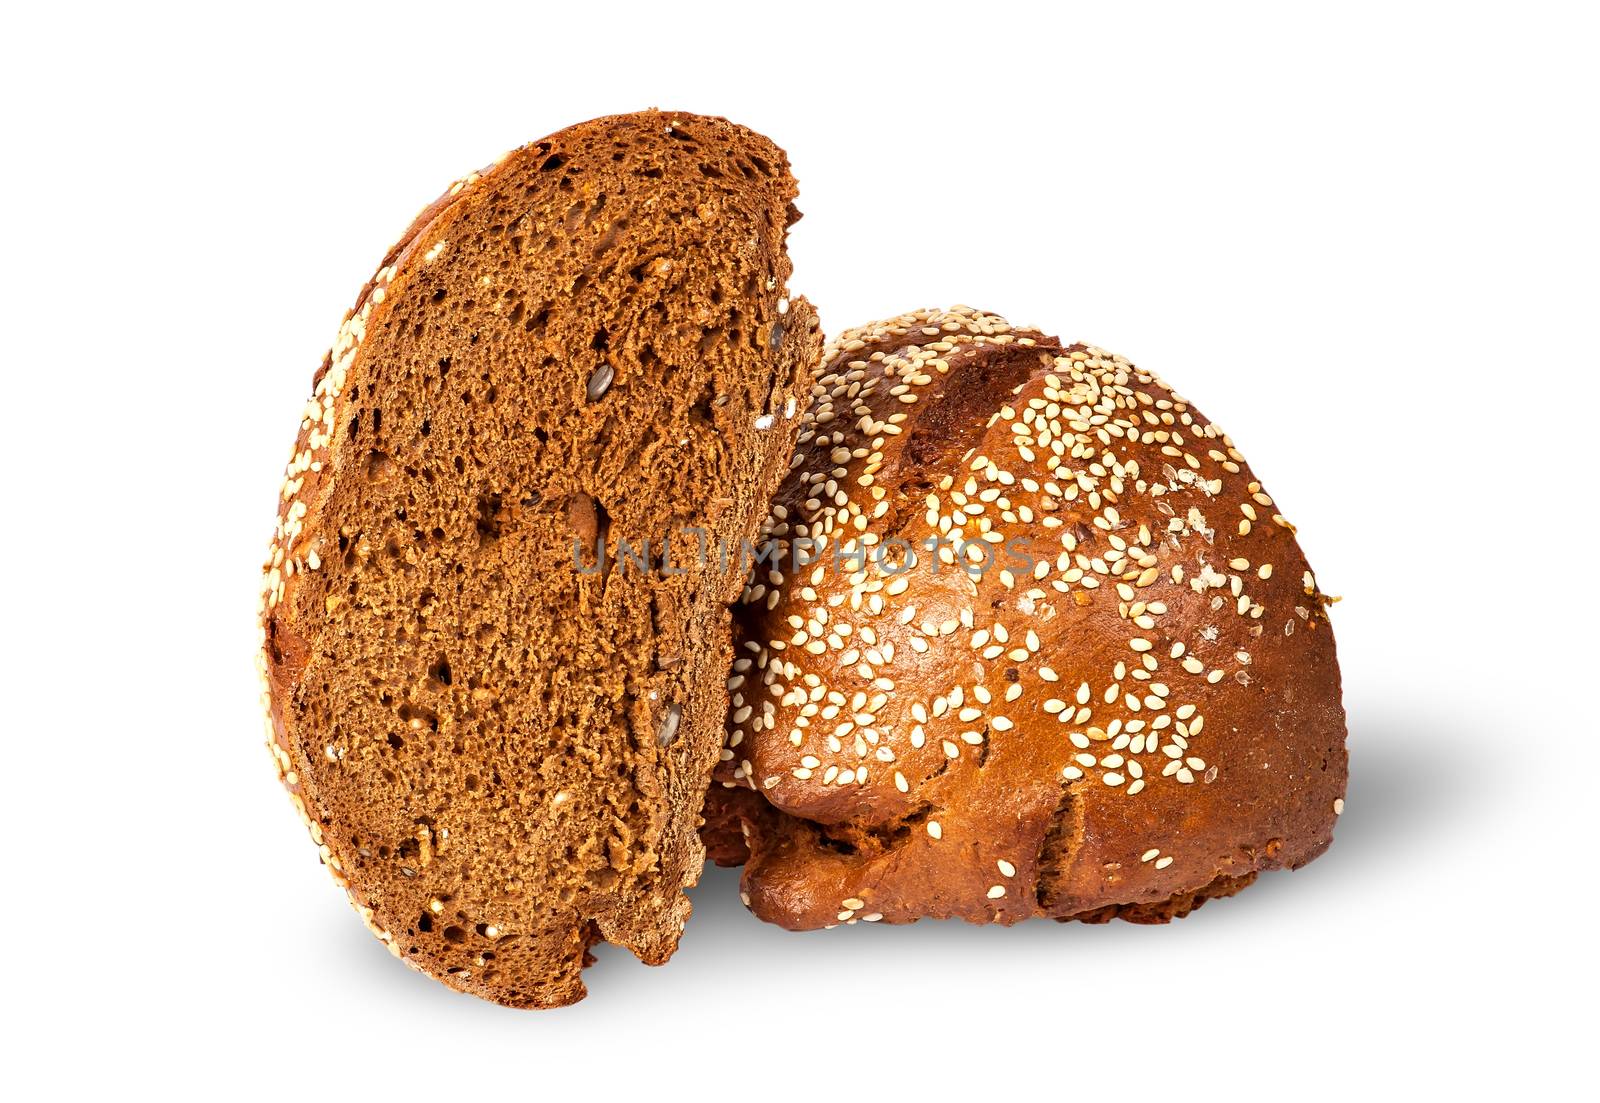 Two halves of rye bread with sesame seeds by Cipariss